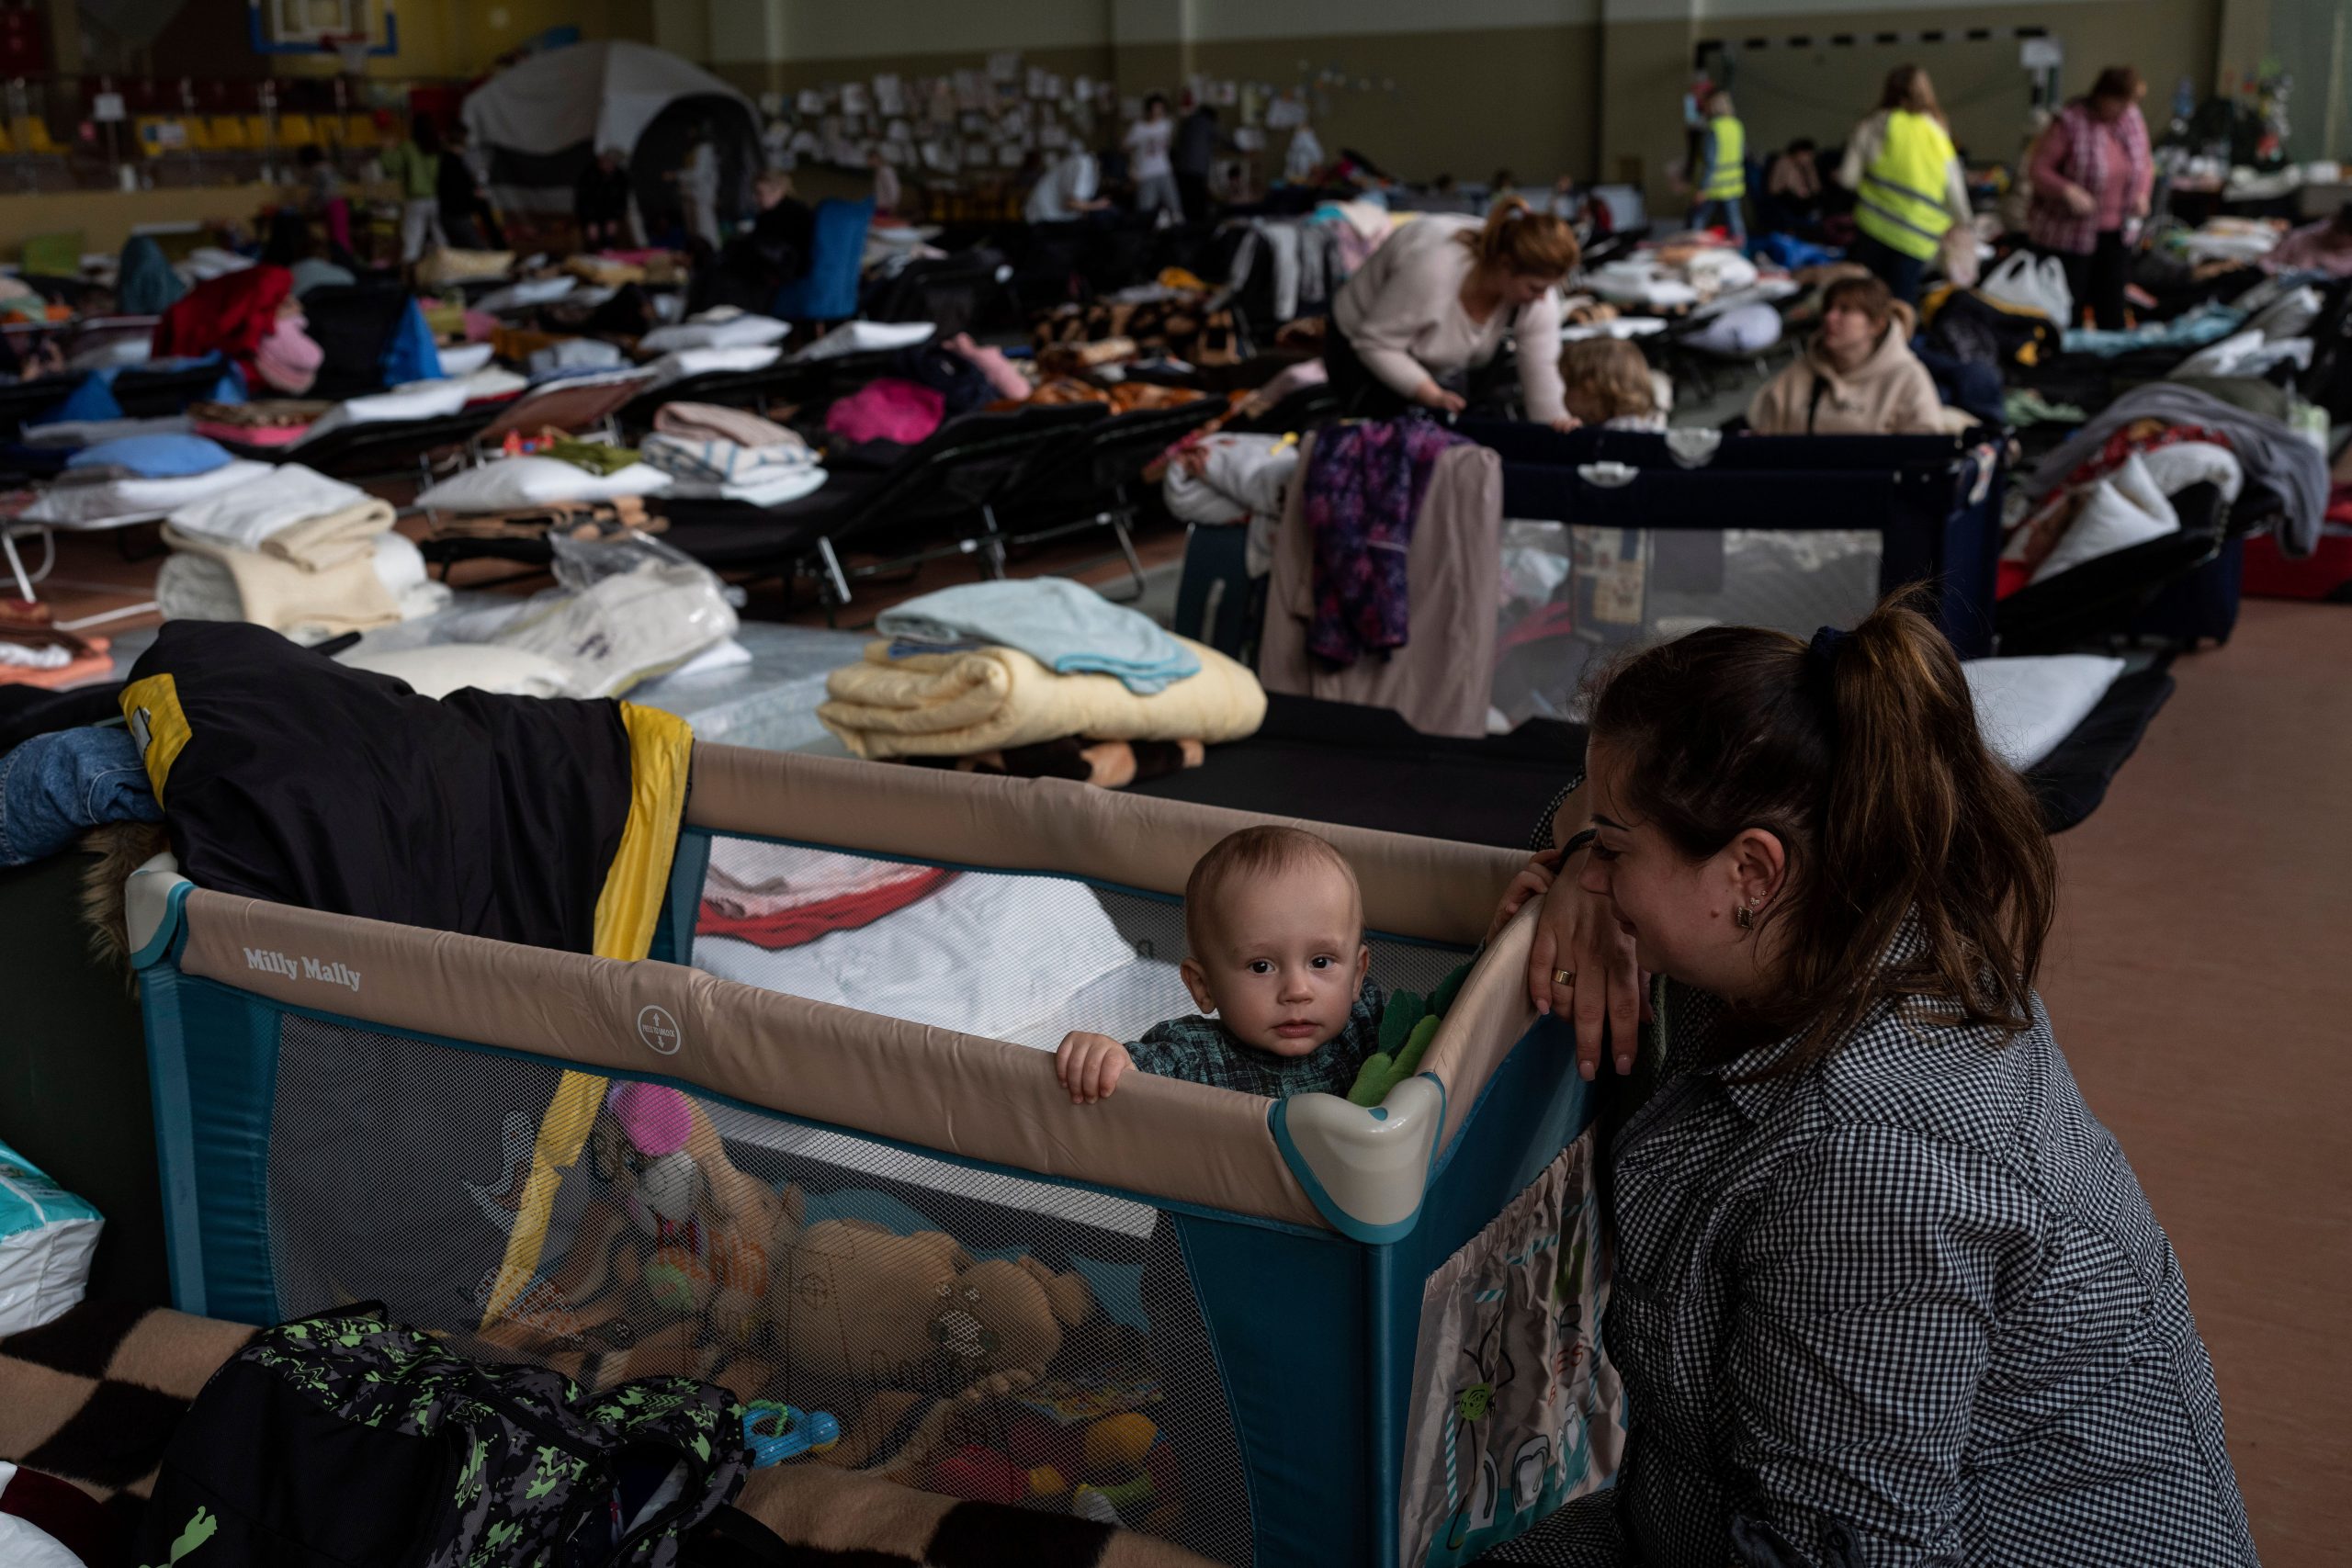 Explained: What is the US doing about Ukrainian refugees?